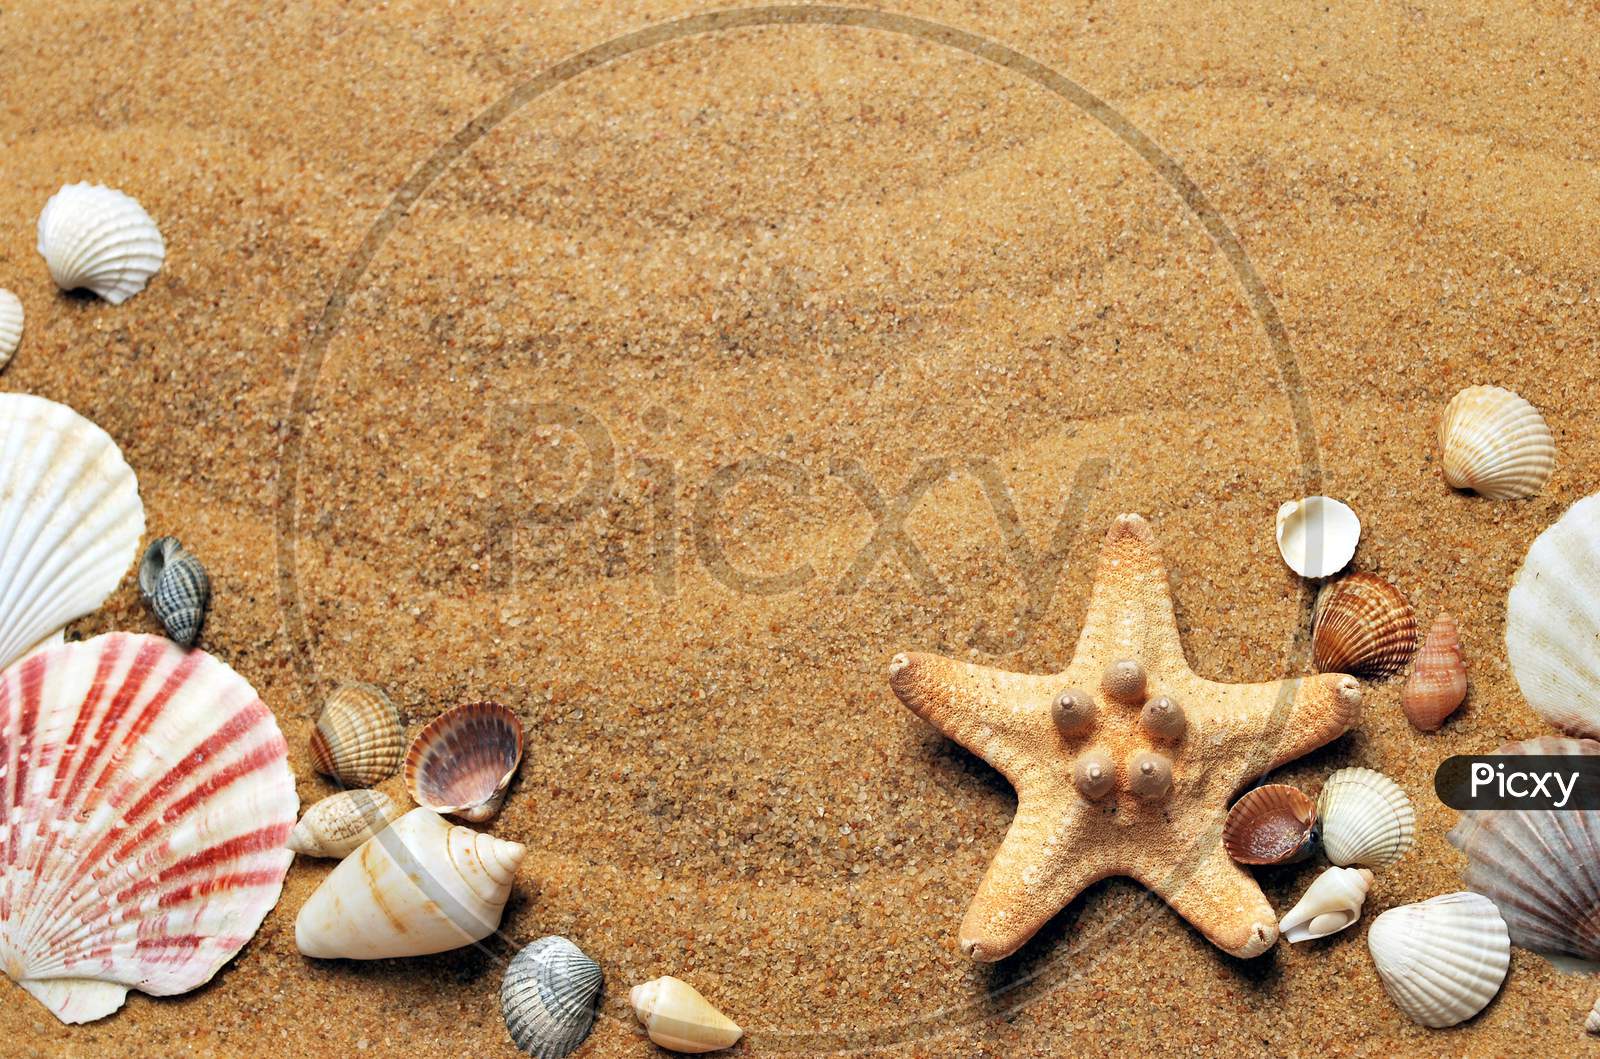 Brown Sand And A Variety Of Snails.  The Image Can Be Used As Wallpaper.